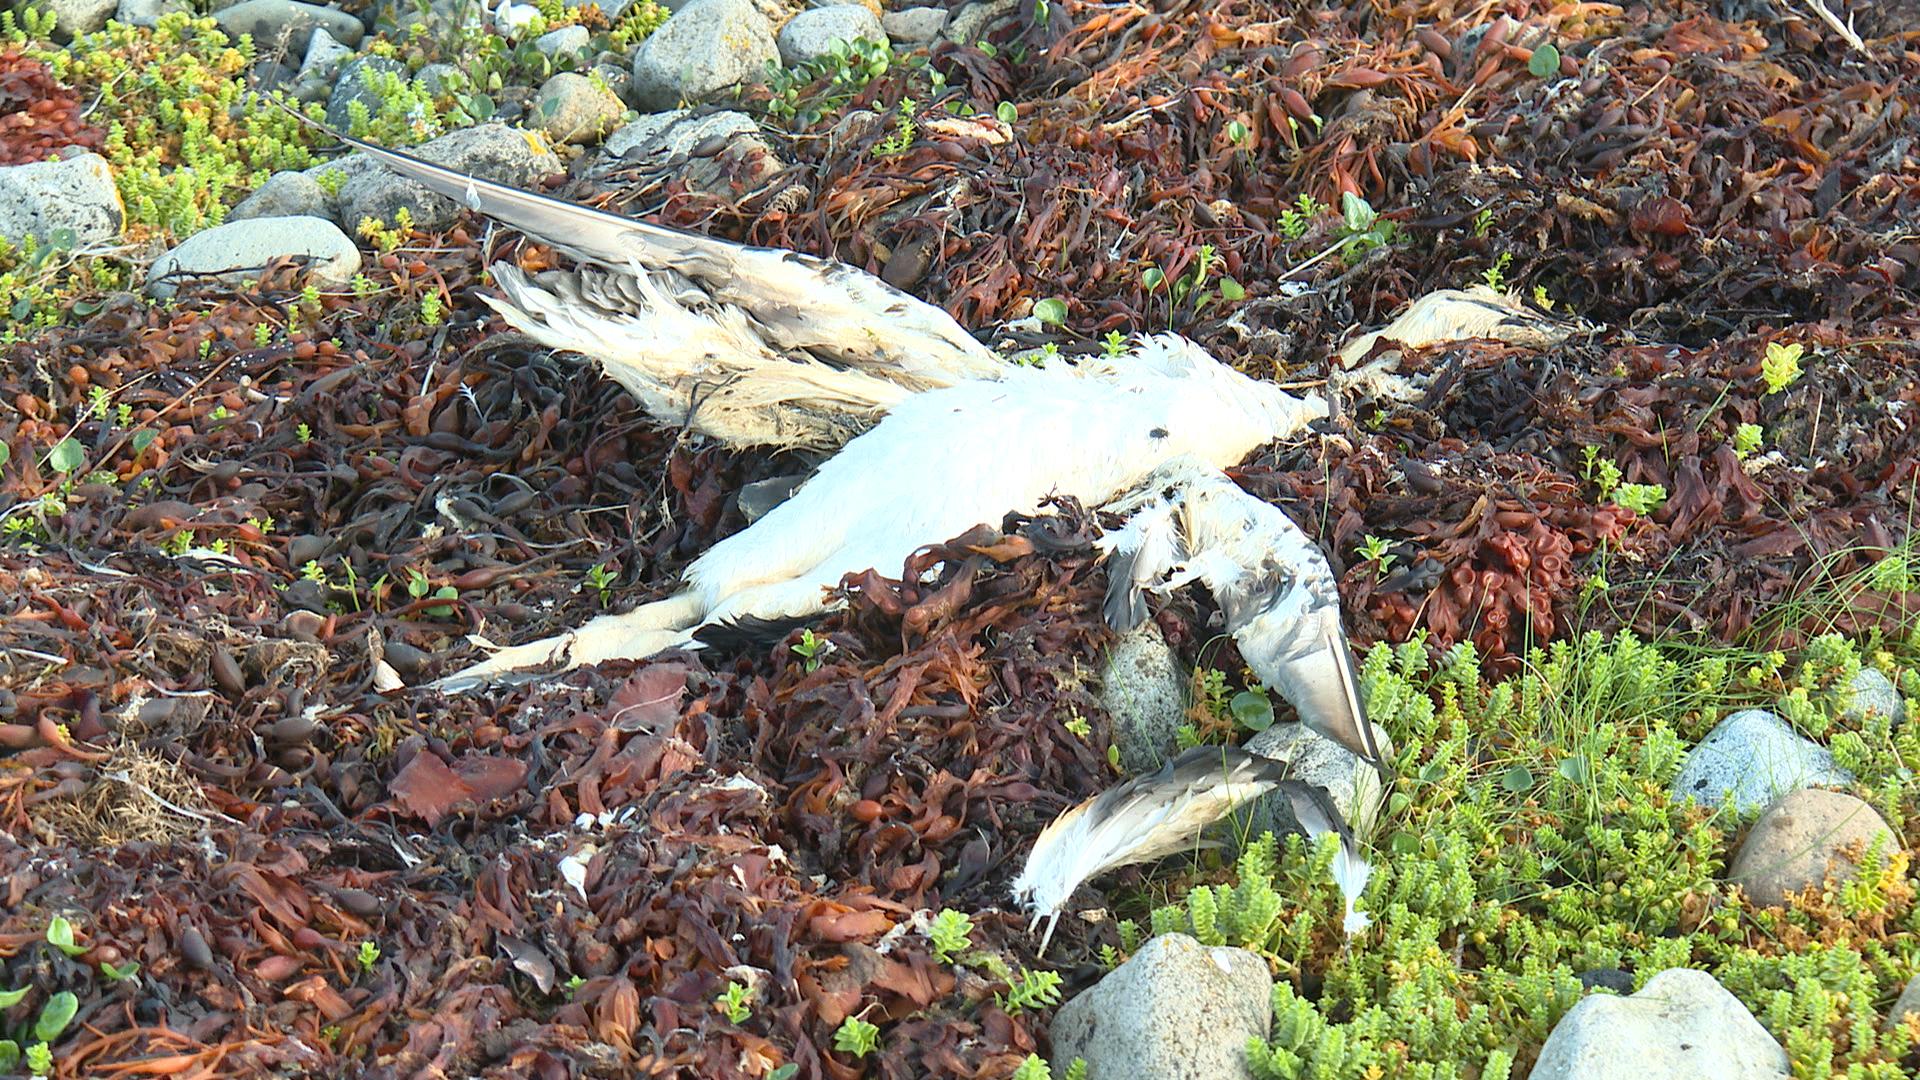 A dead gannet washed ashore in Mull.